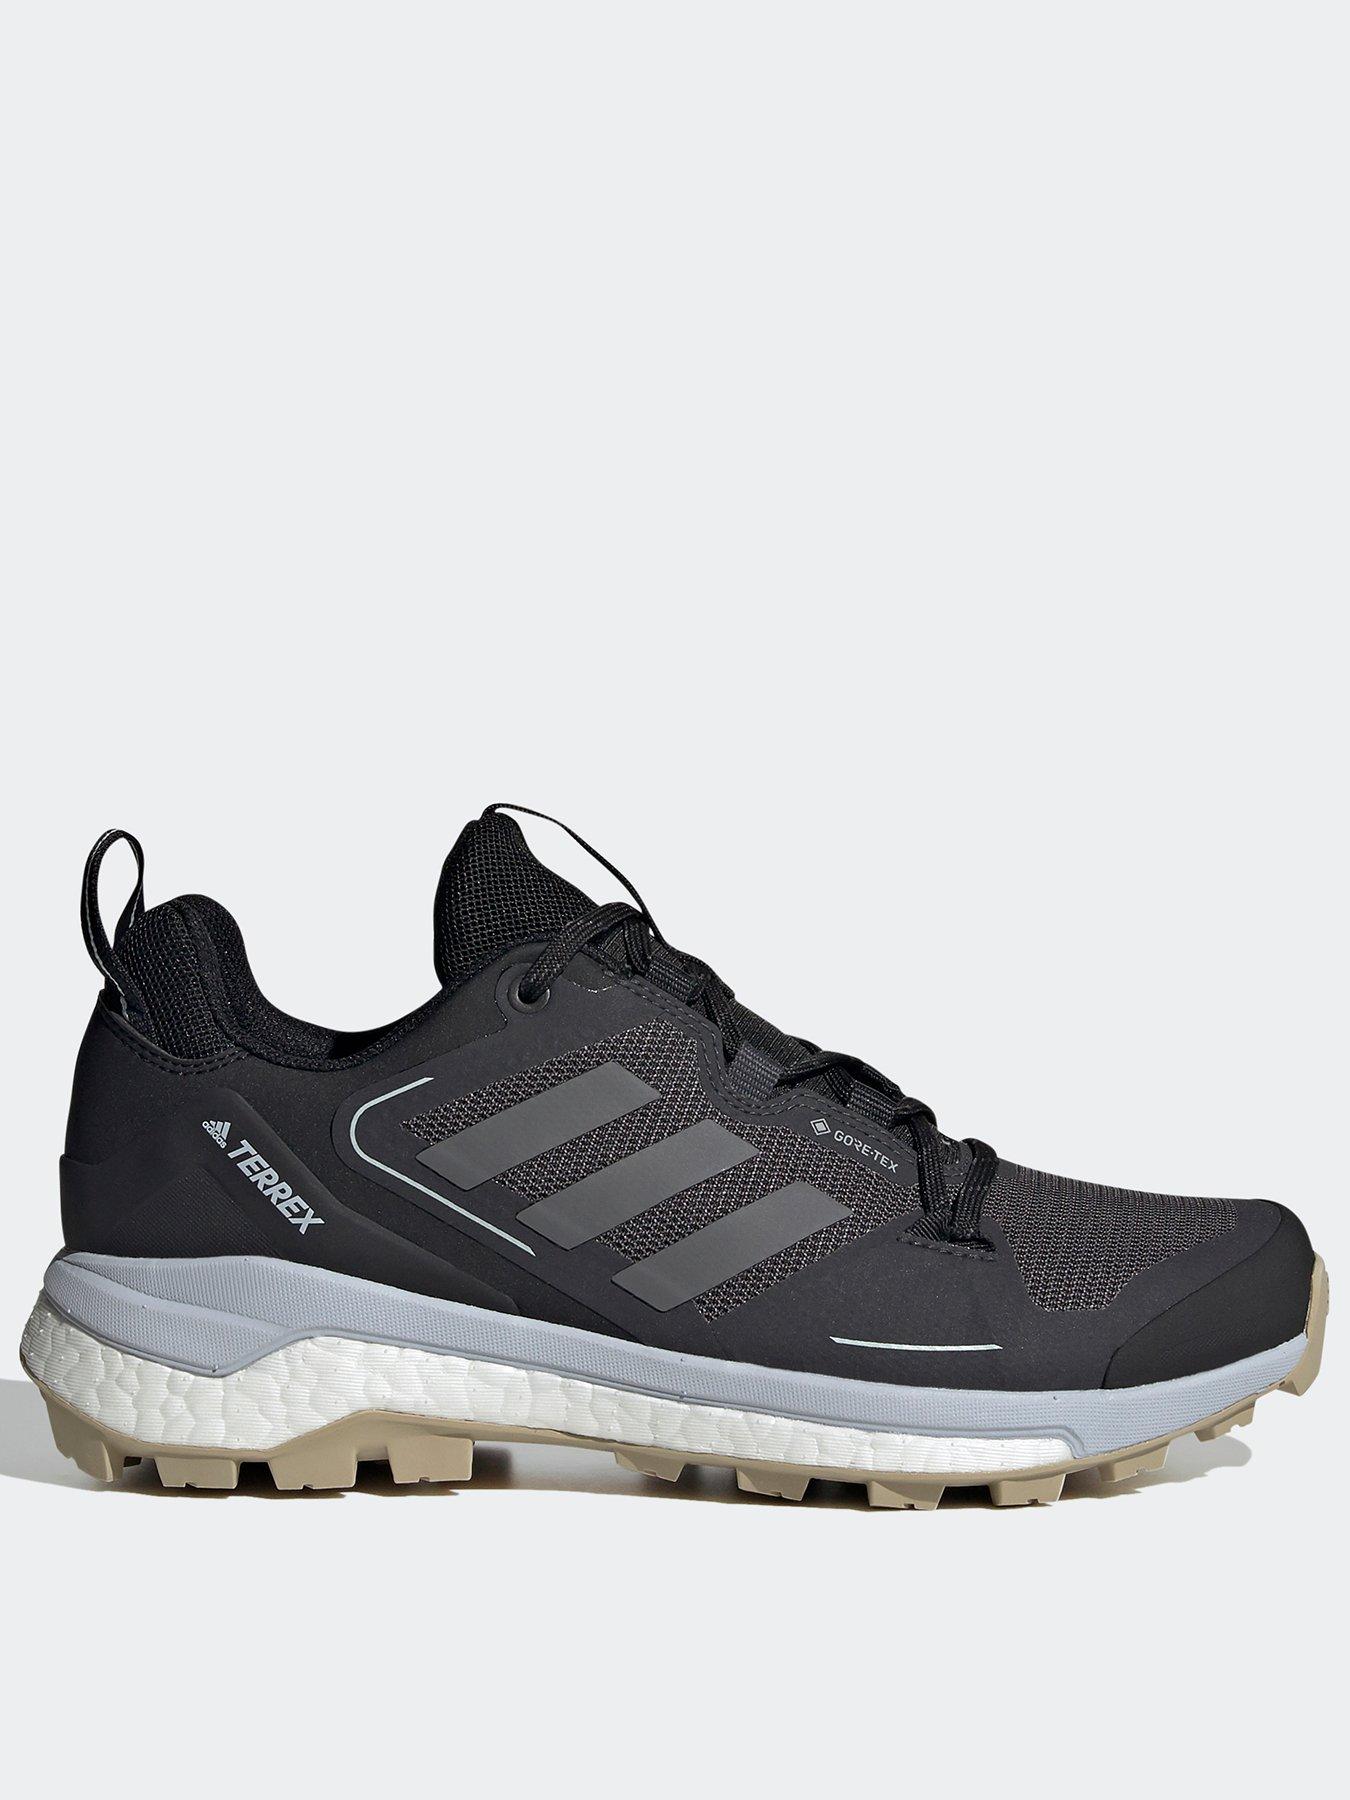 adidas Terrex Skychaser Gore-tex 2.0 Hiking Shoes | very.co.uk